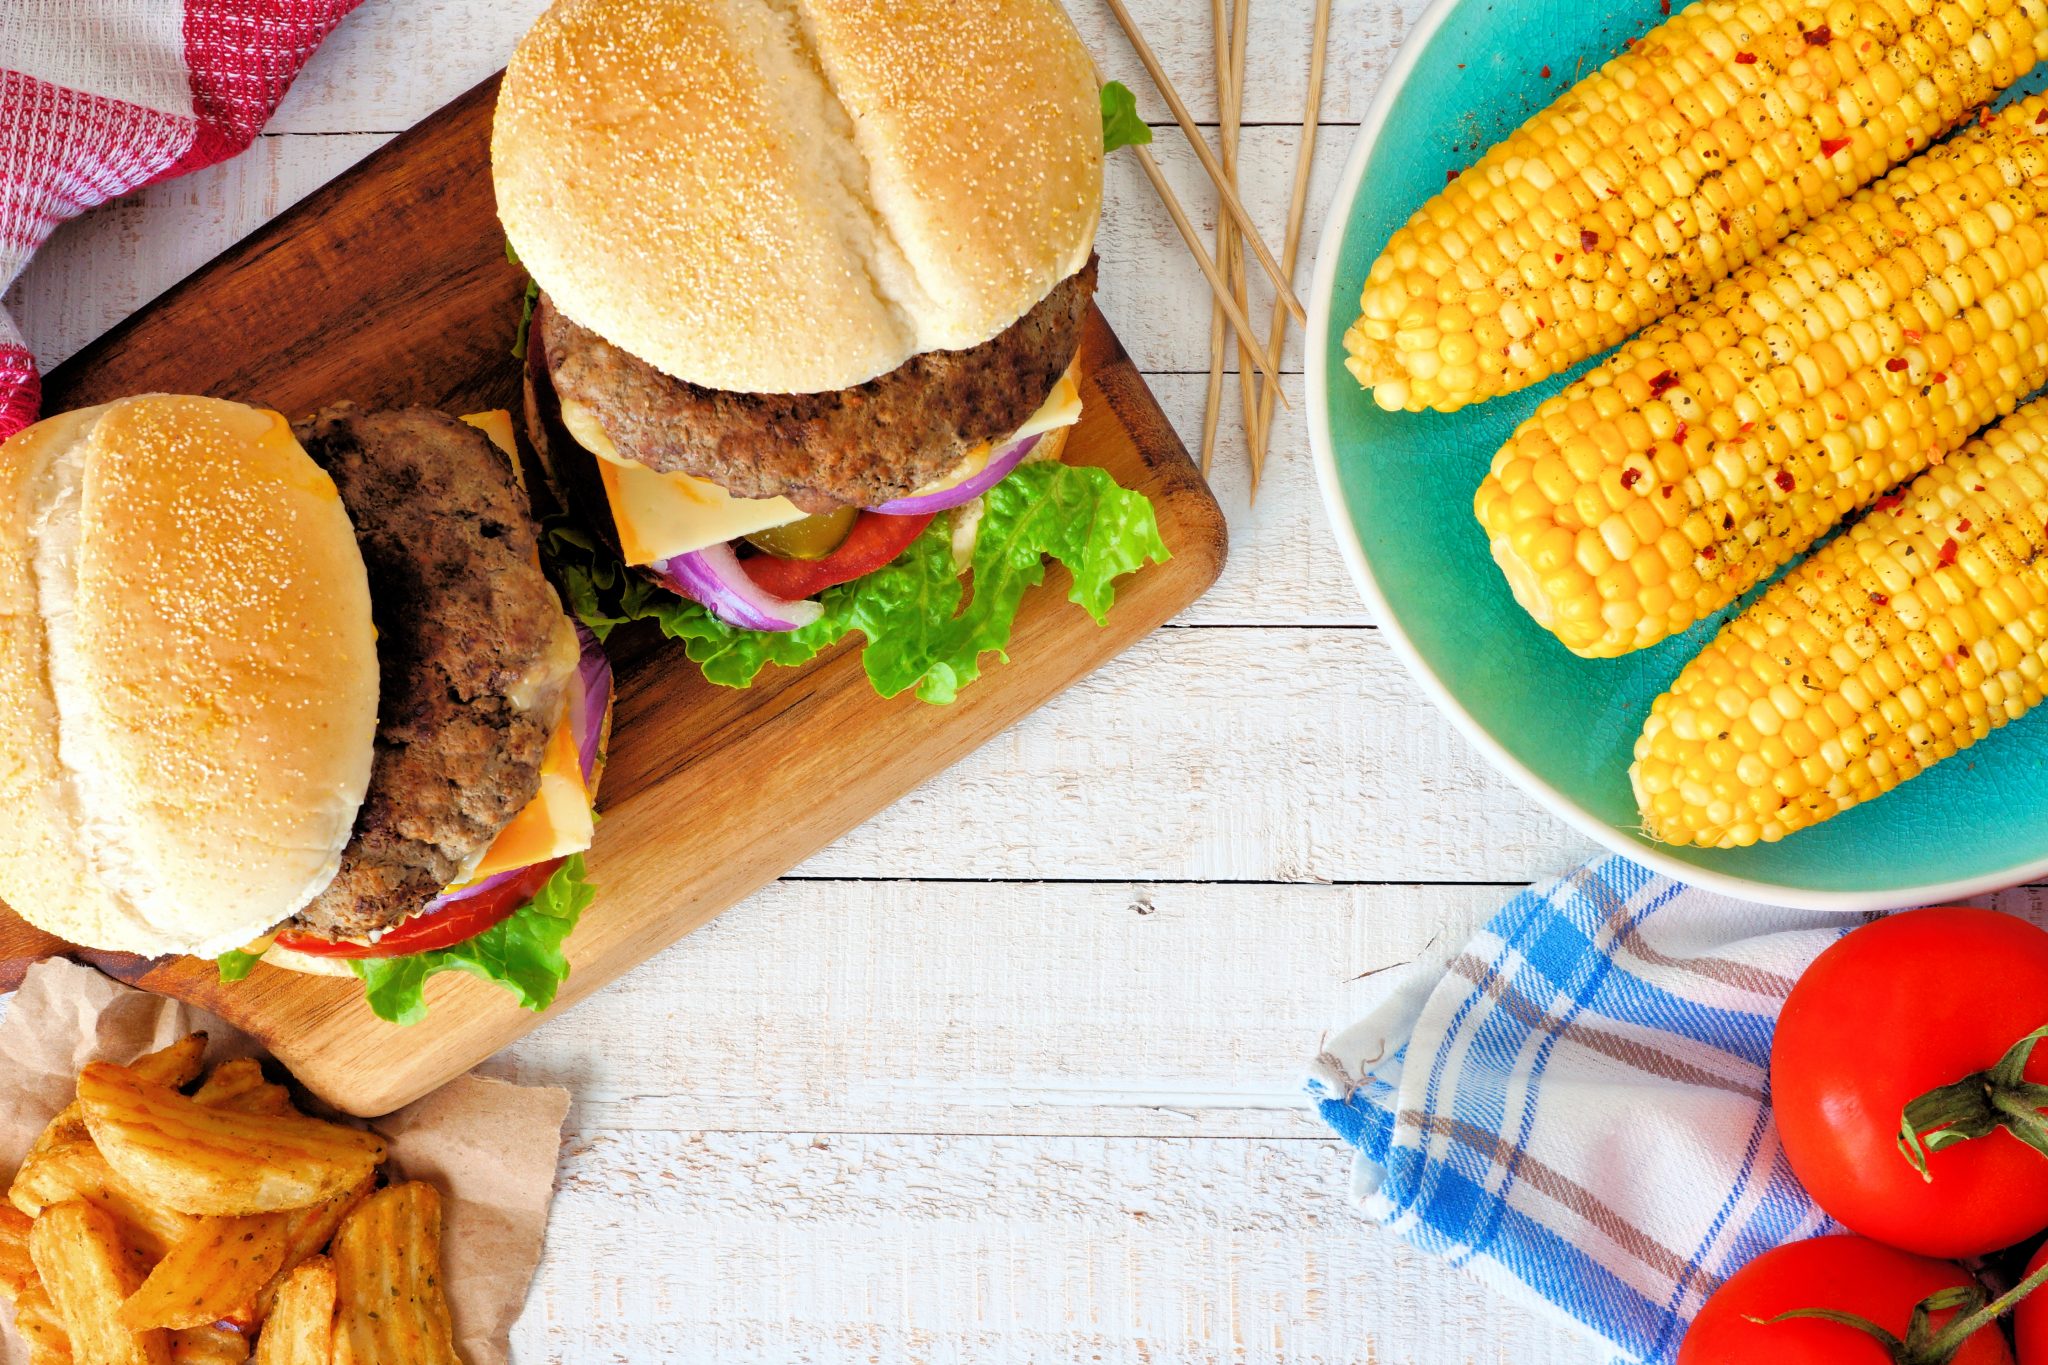 Picnic scene with hamburgers, corn on the cob and potato wedges. Top view over a white wood background.